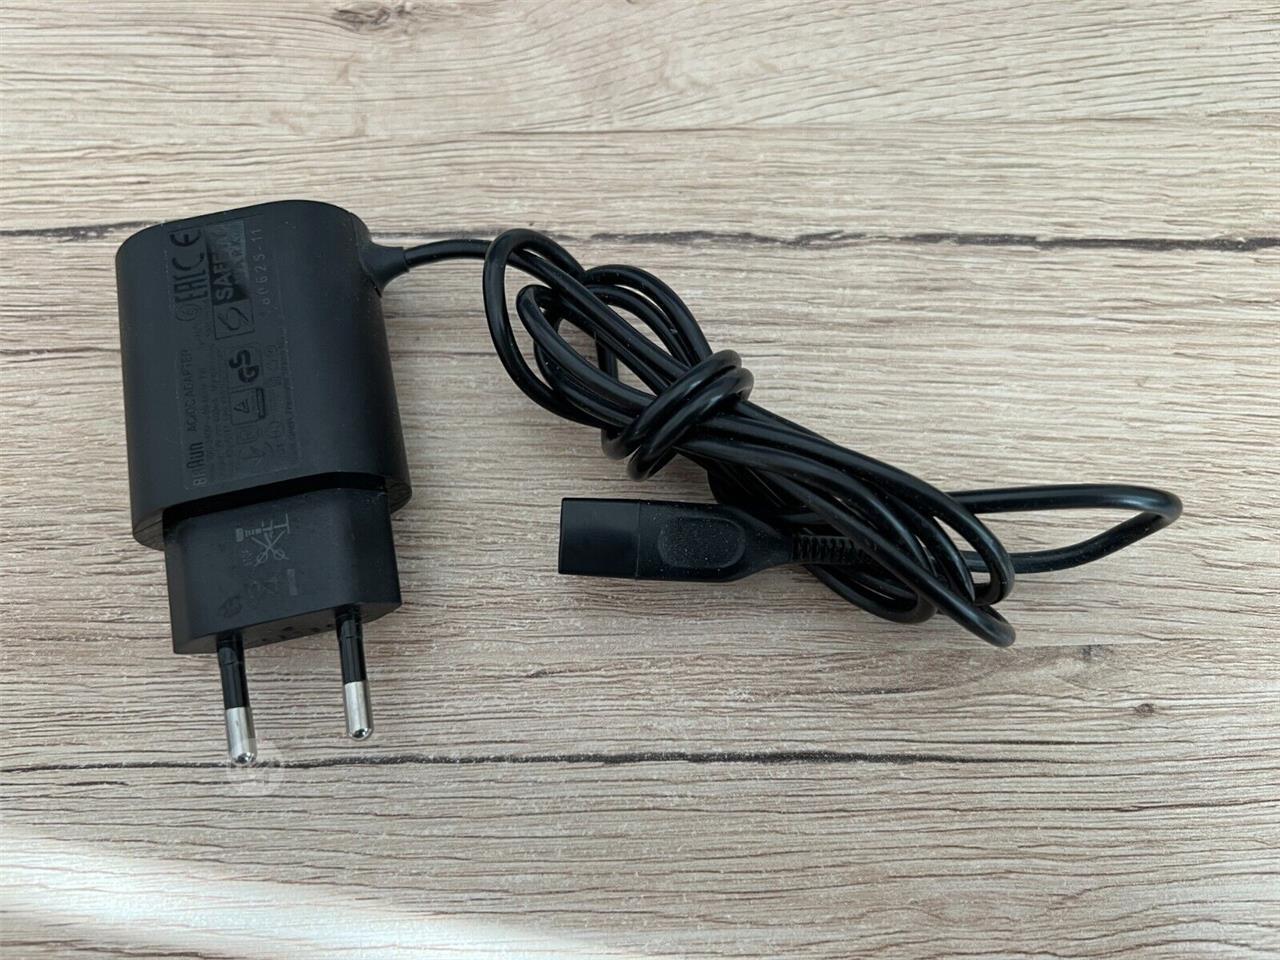 Braun 492-5217 power supply charger power adapter 12V 0.4A *SH